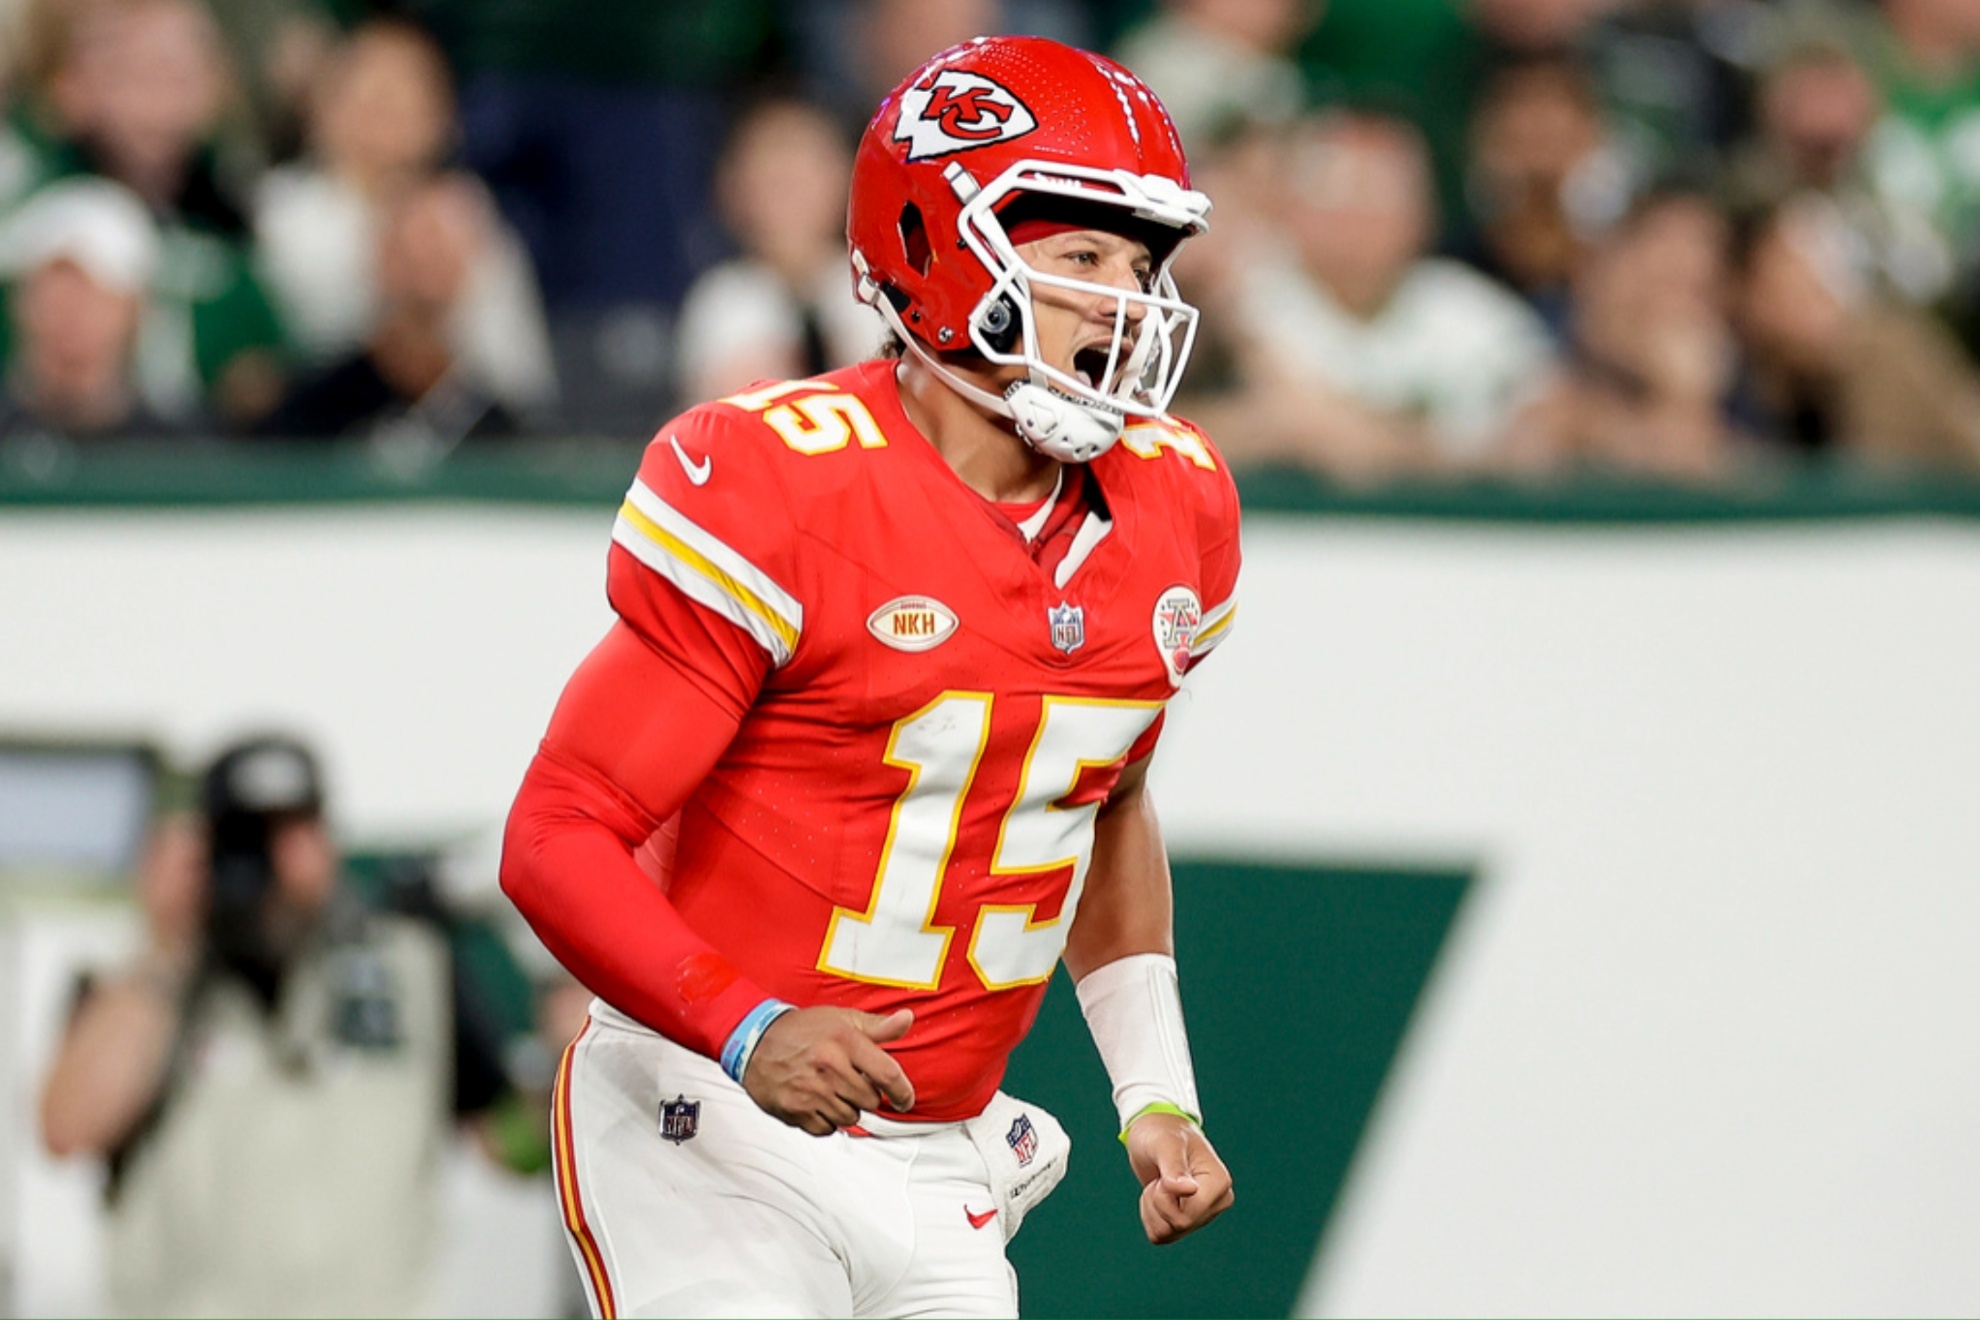 The Chiefs are looking to upgrade offensive weapons around Patrick Mahomes